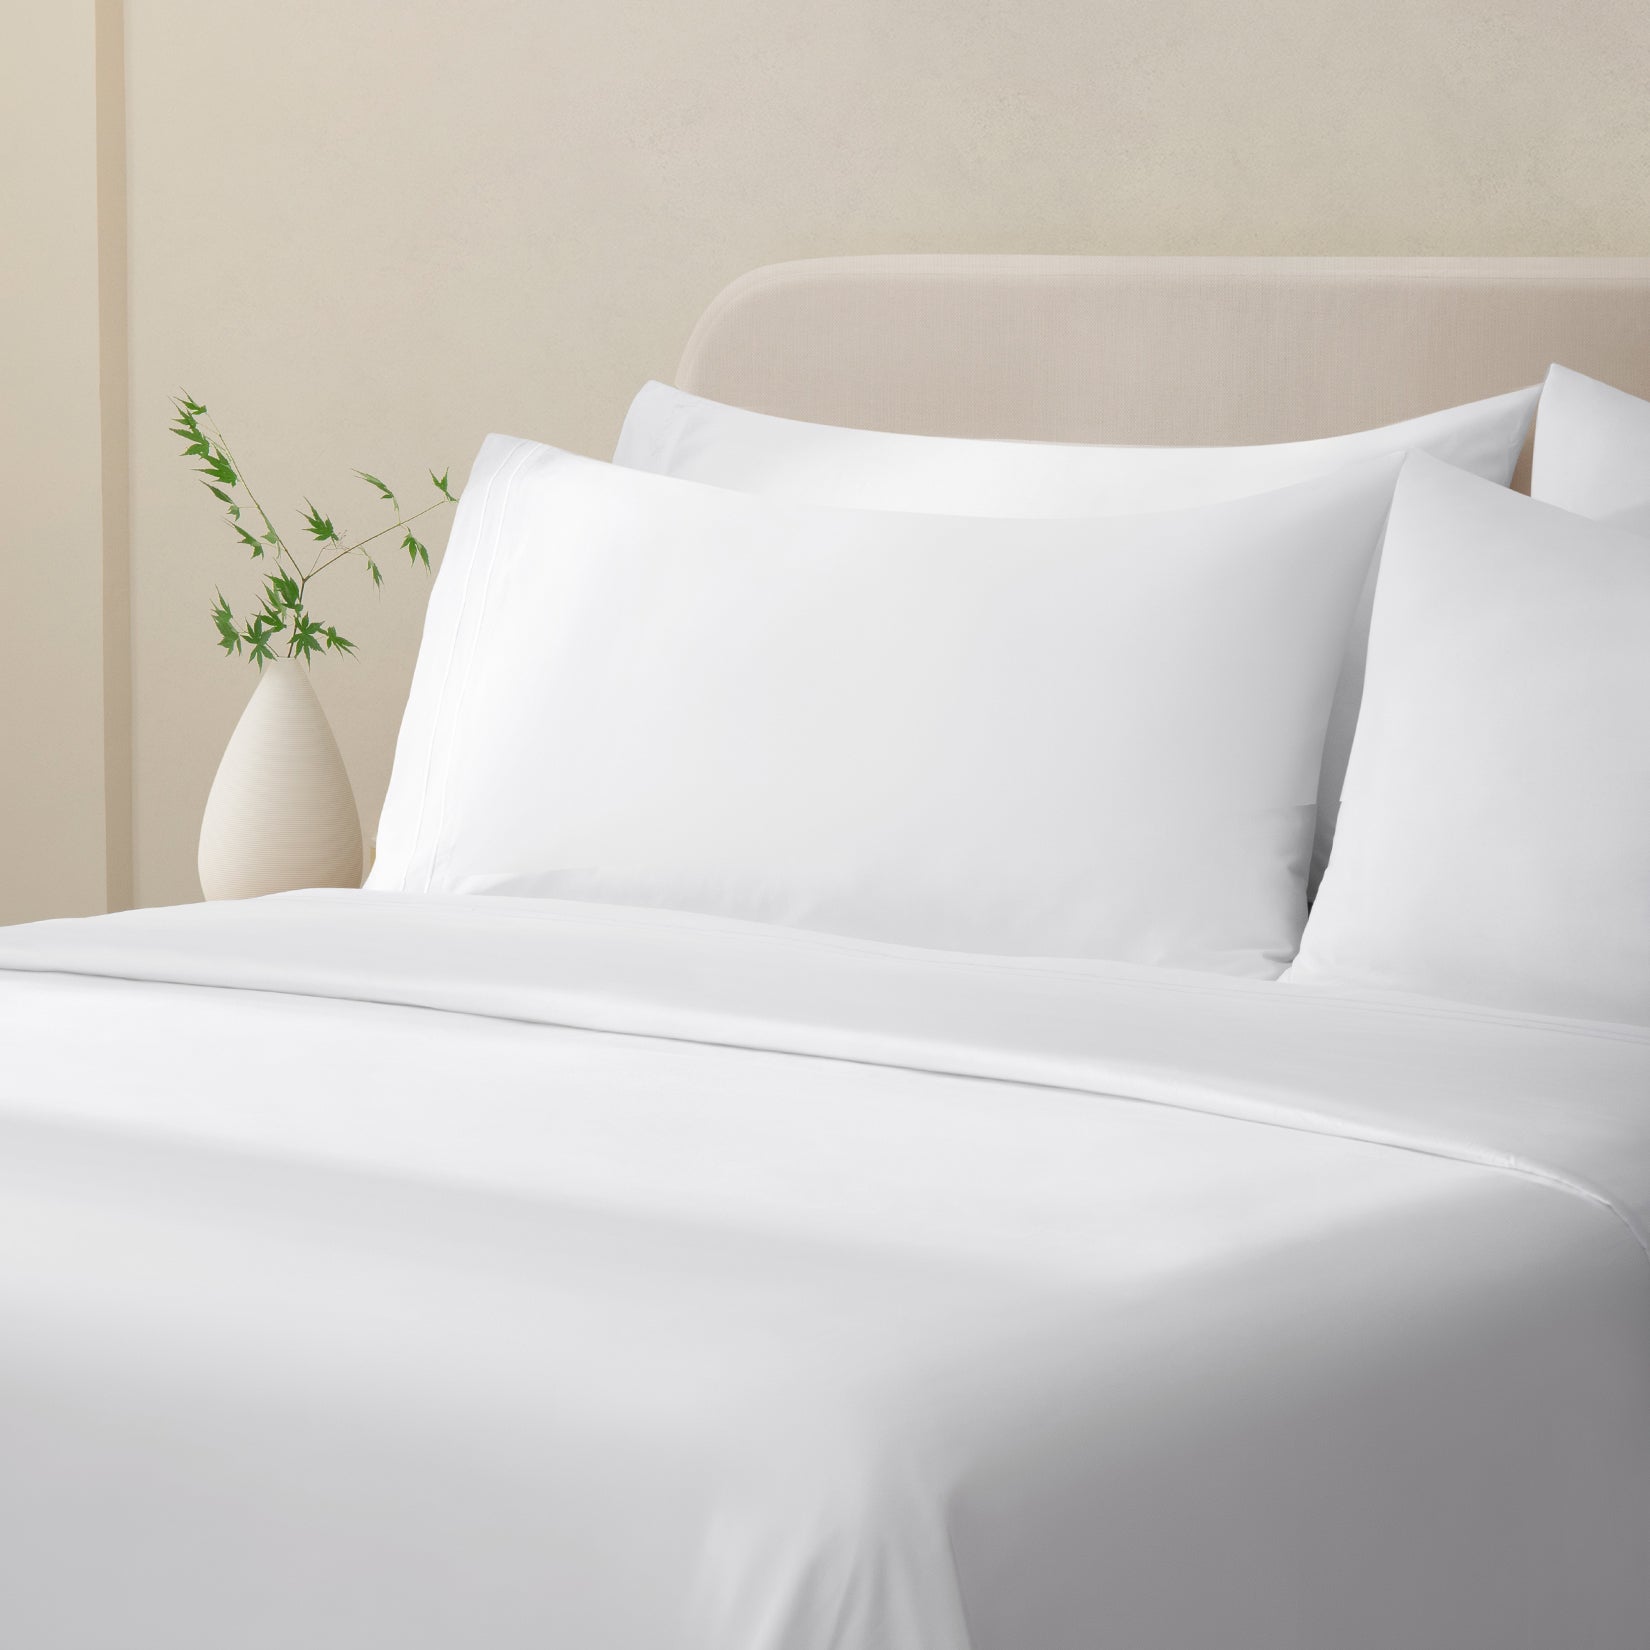 Sofia Classic White Double Satin Stitched Cuff 300 thread count cotton bed sheet set. White pillows and white cotton sheets on bed next to side table and plant.